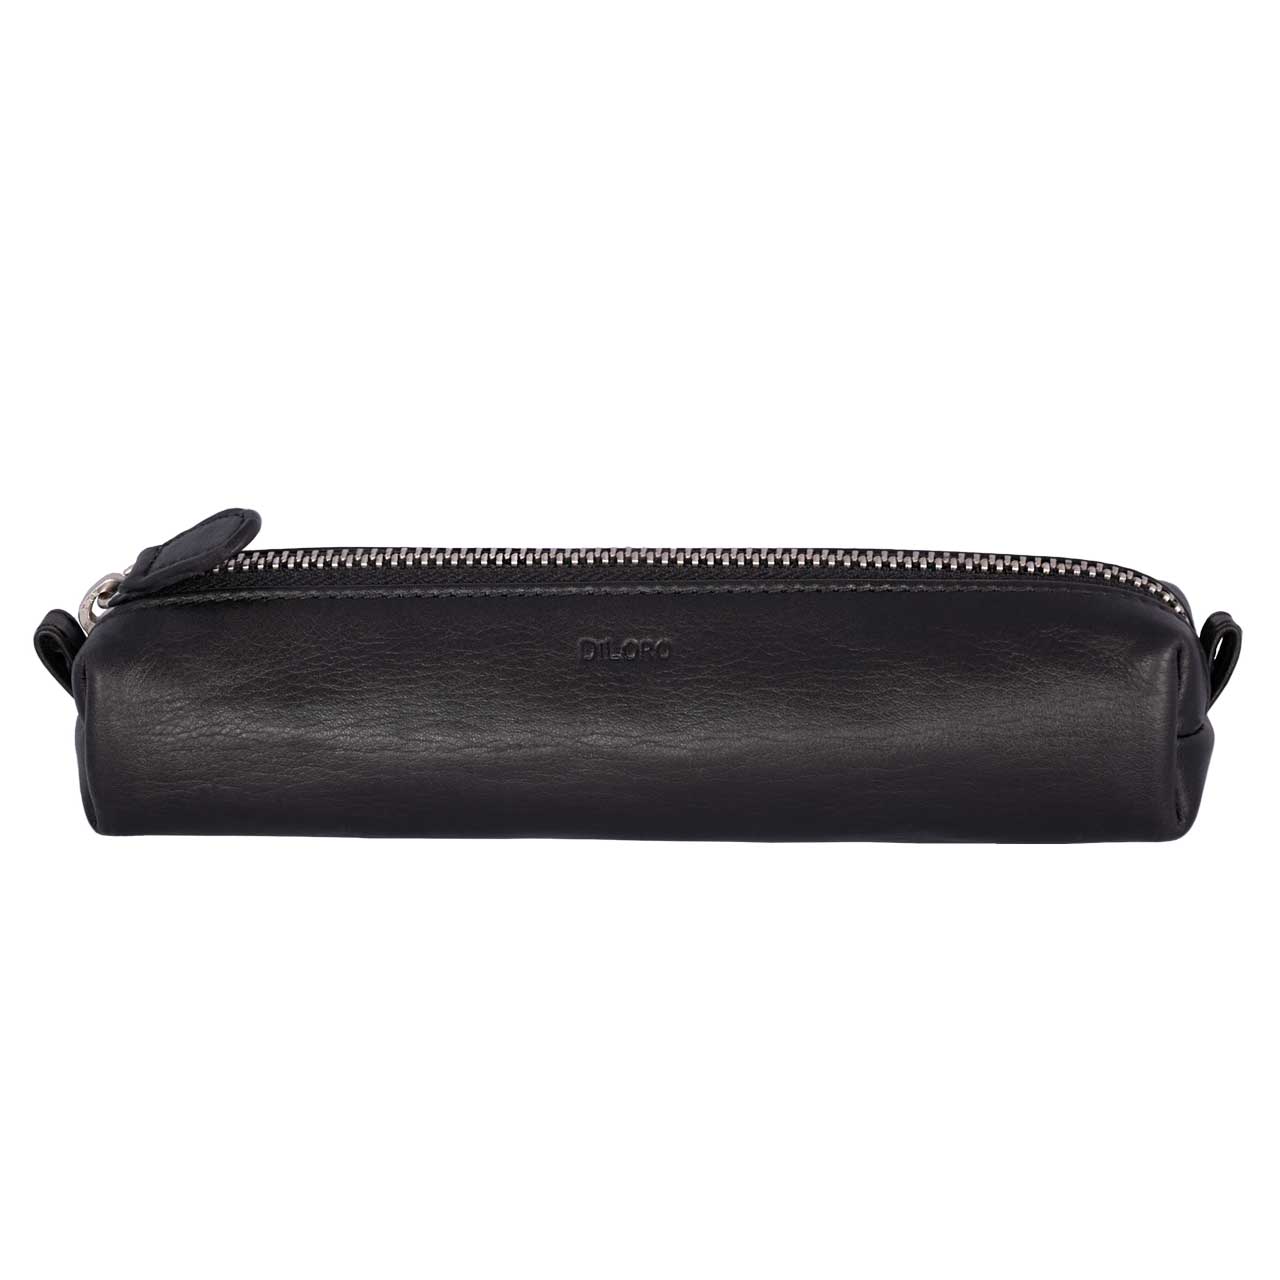 Multi-Purpose Zippered Leather Pen Pencil Case in Various Colors - Black with DiLoro logo